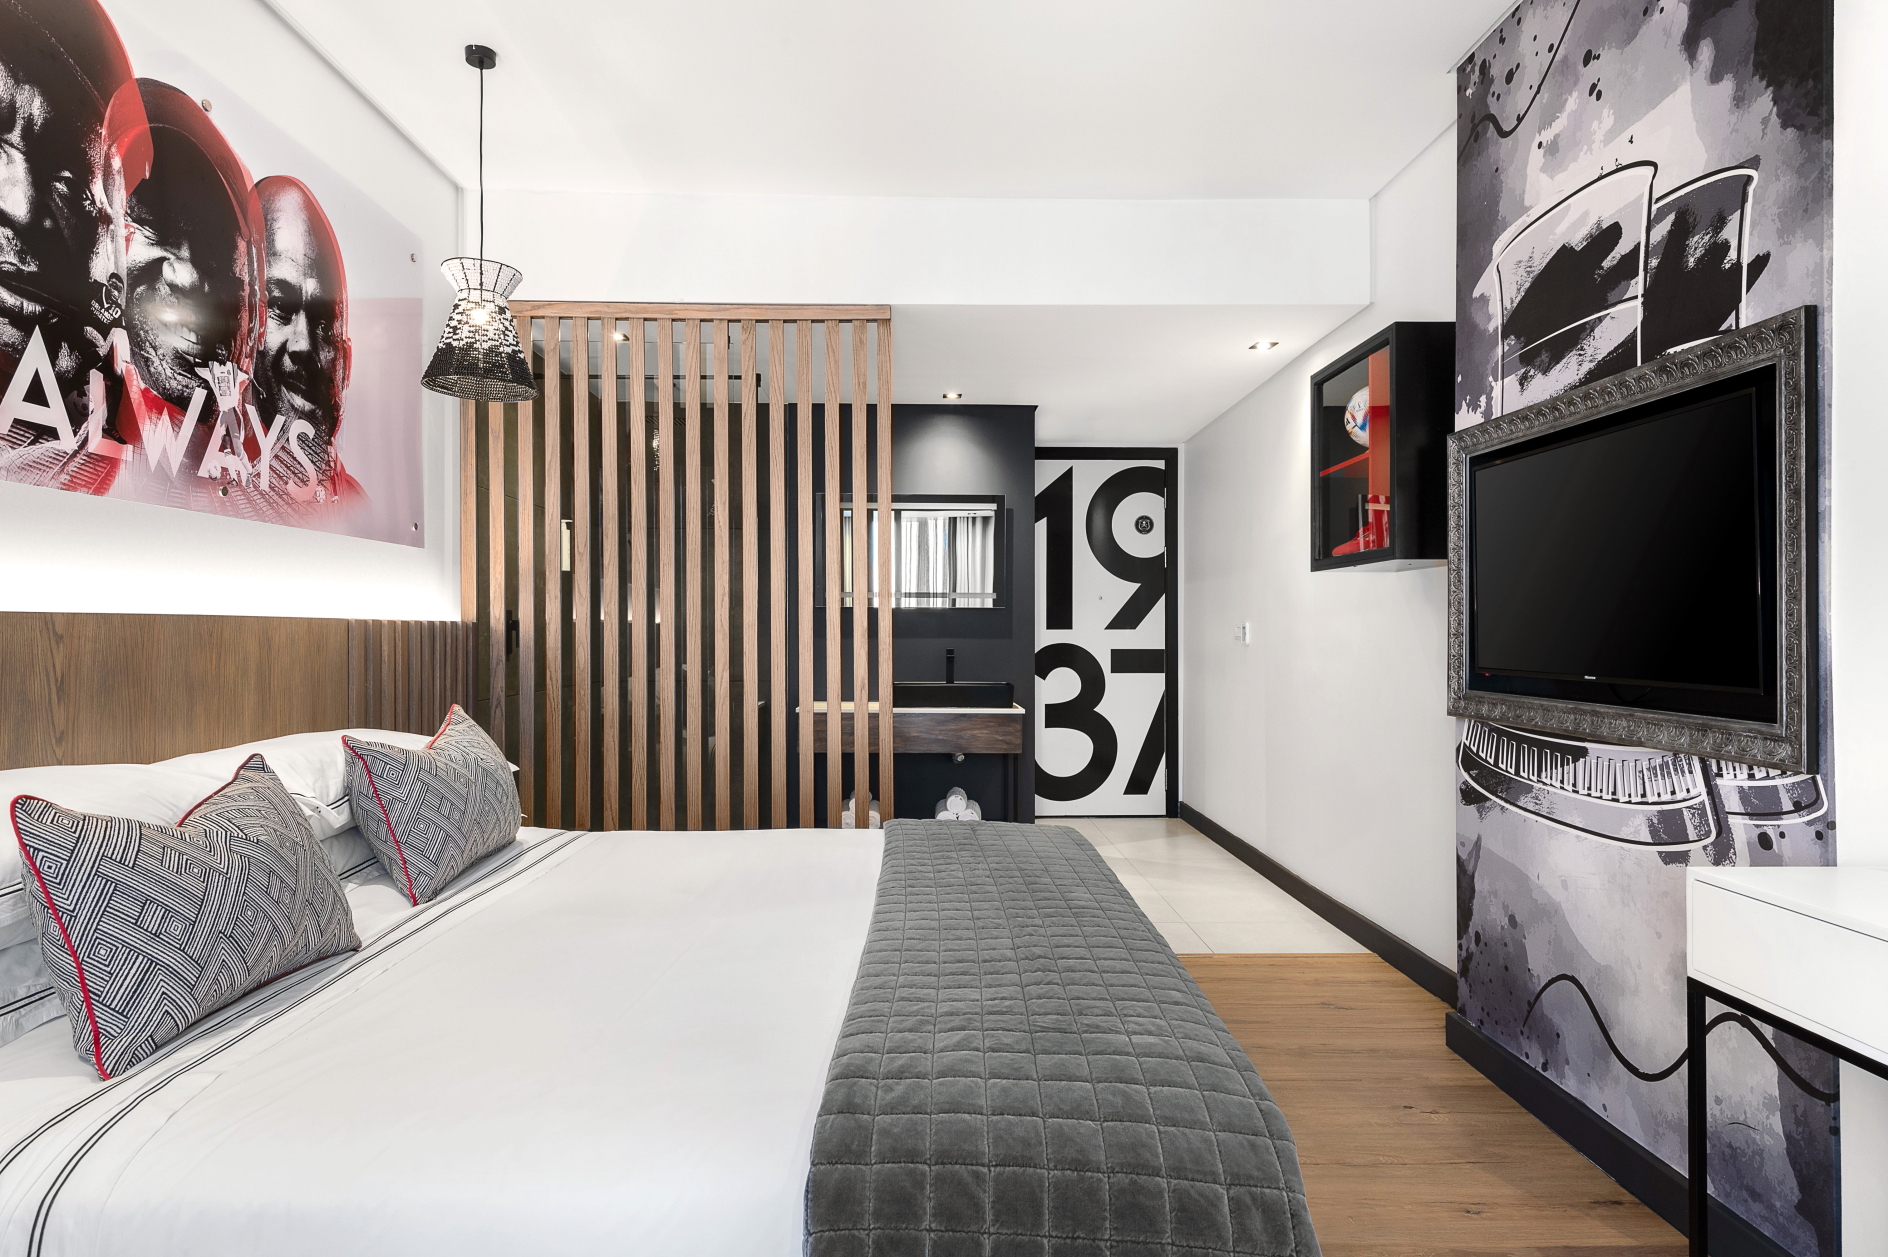 Orlando Pirates Themed Room at the Protea Hotel Fire & Ice! by Marriott Johannesburg Melrose Arch in South Africa. Click to enlarge.